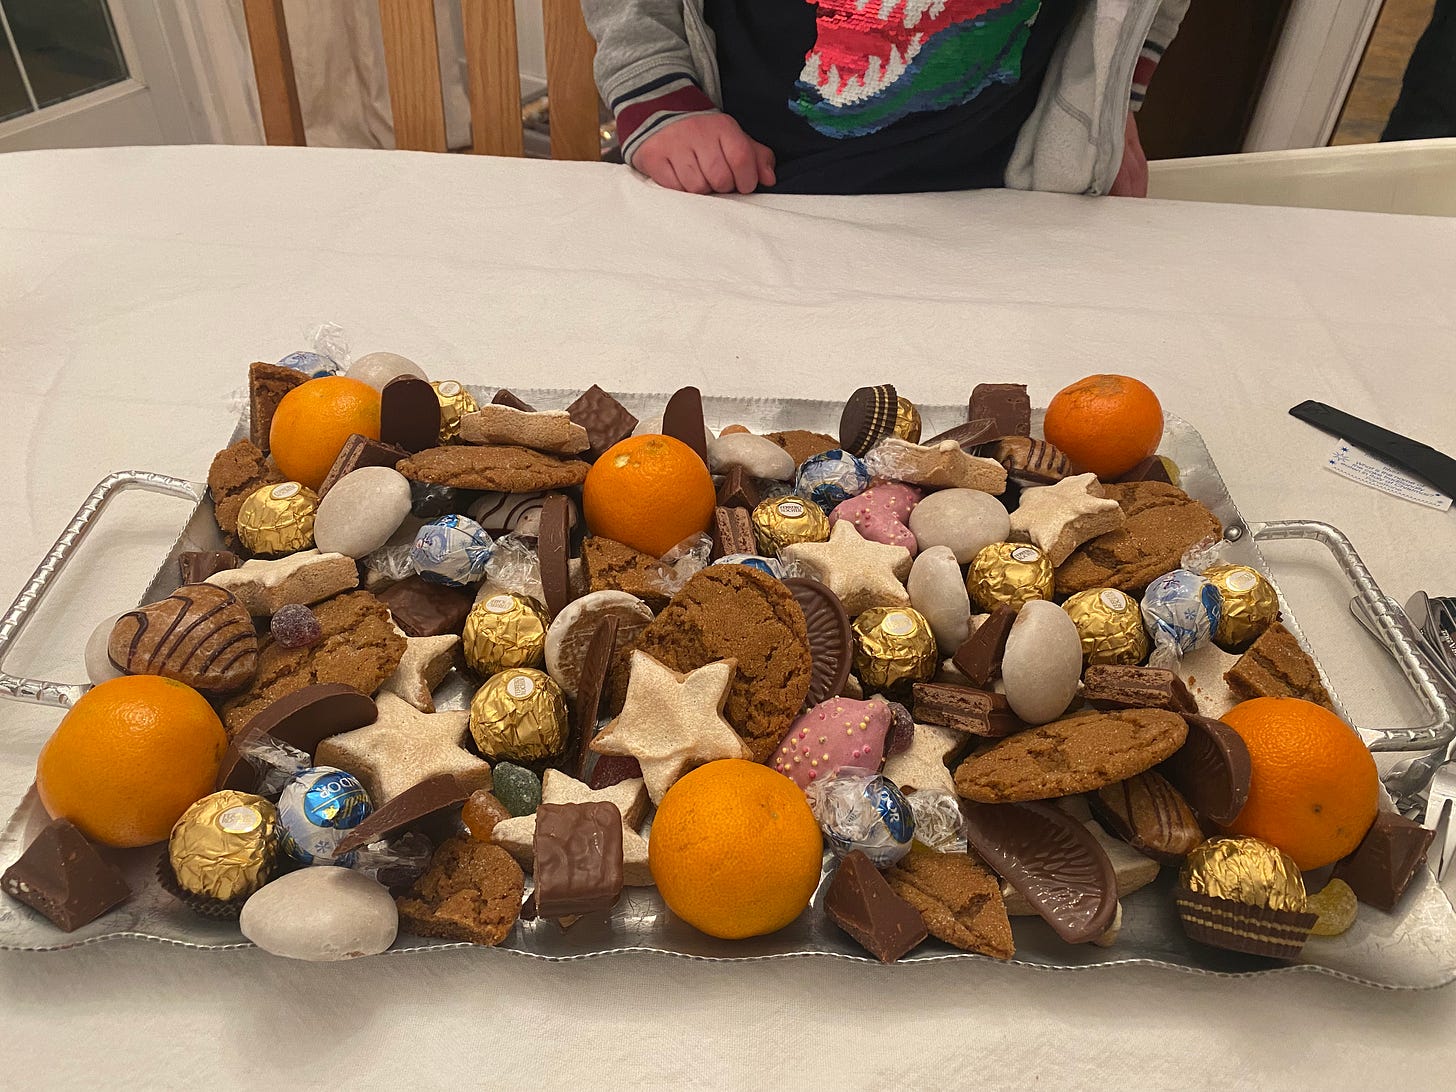 A large platter of chocolates, German cookies, and mandarin oranges. In the background a child wearing a sparkly dinosaur shirt rests his hand on the table.